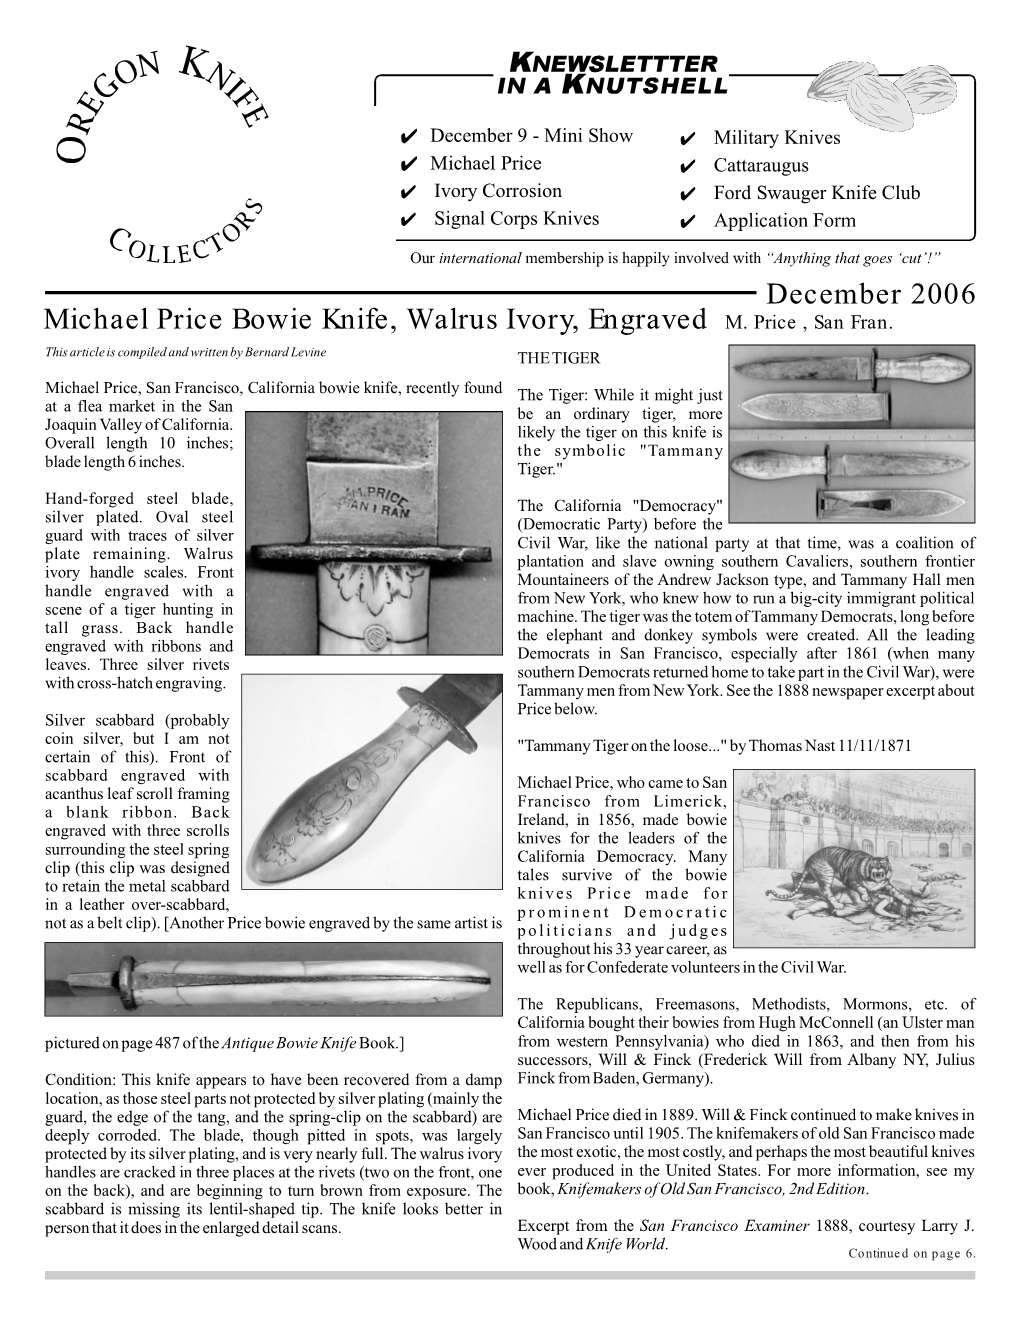 December 2006 Michael Price Bowie Knife, Walrus Ivory, Engraved M